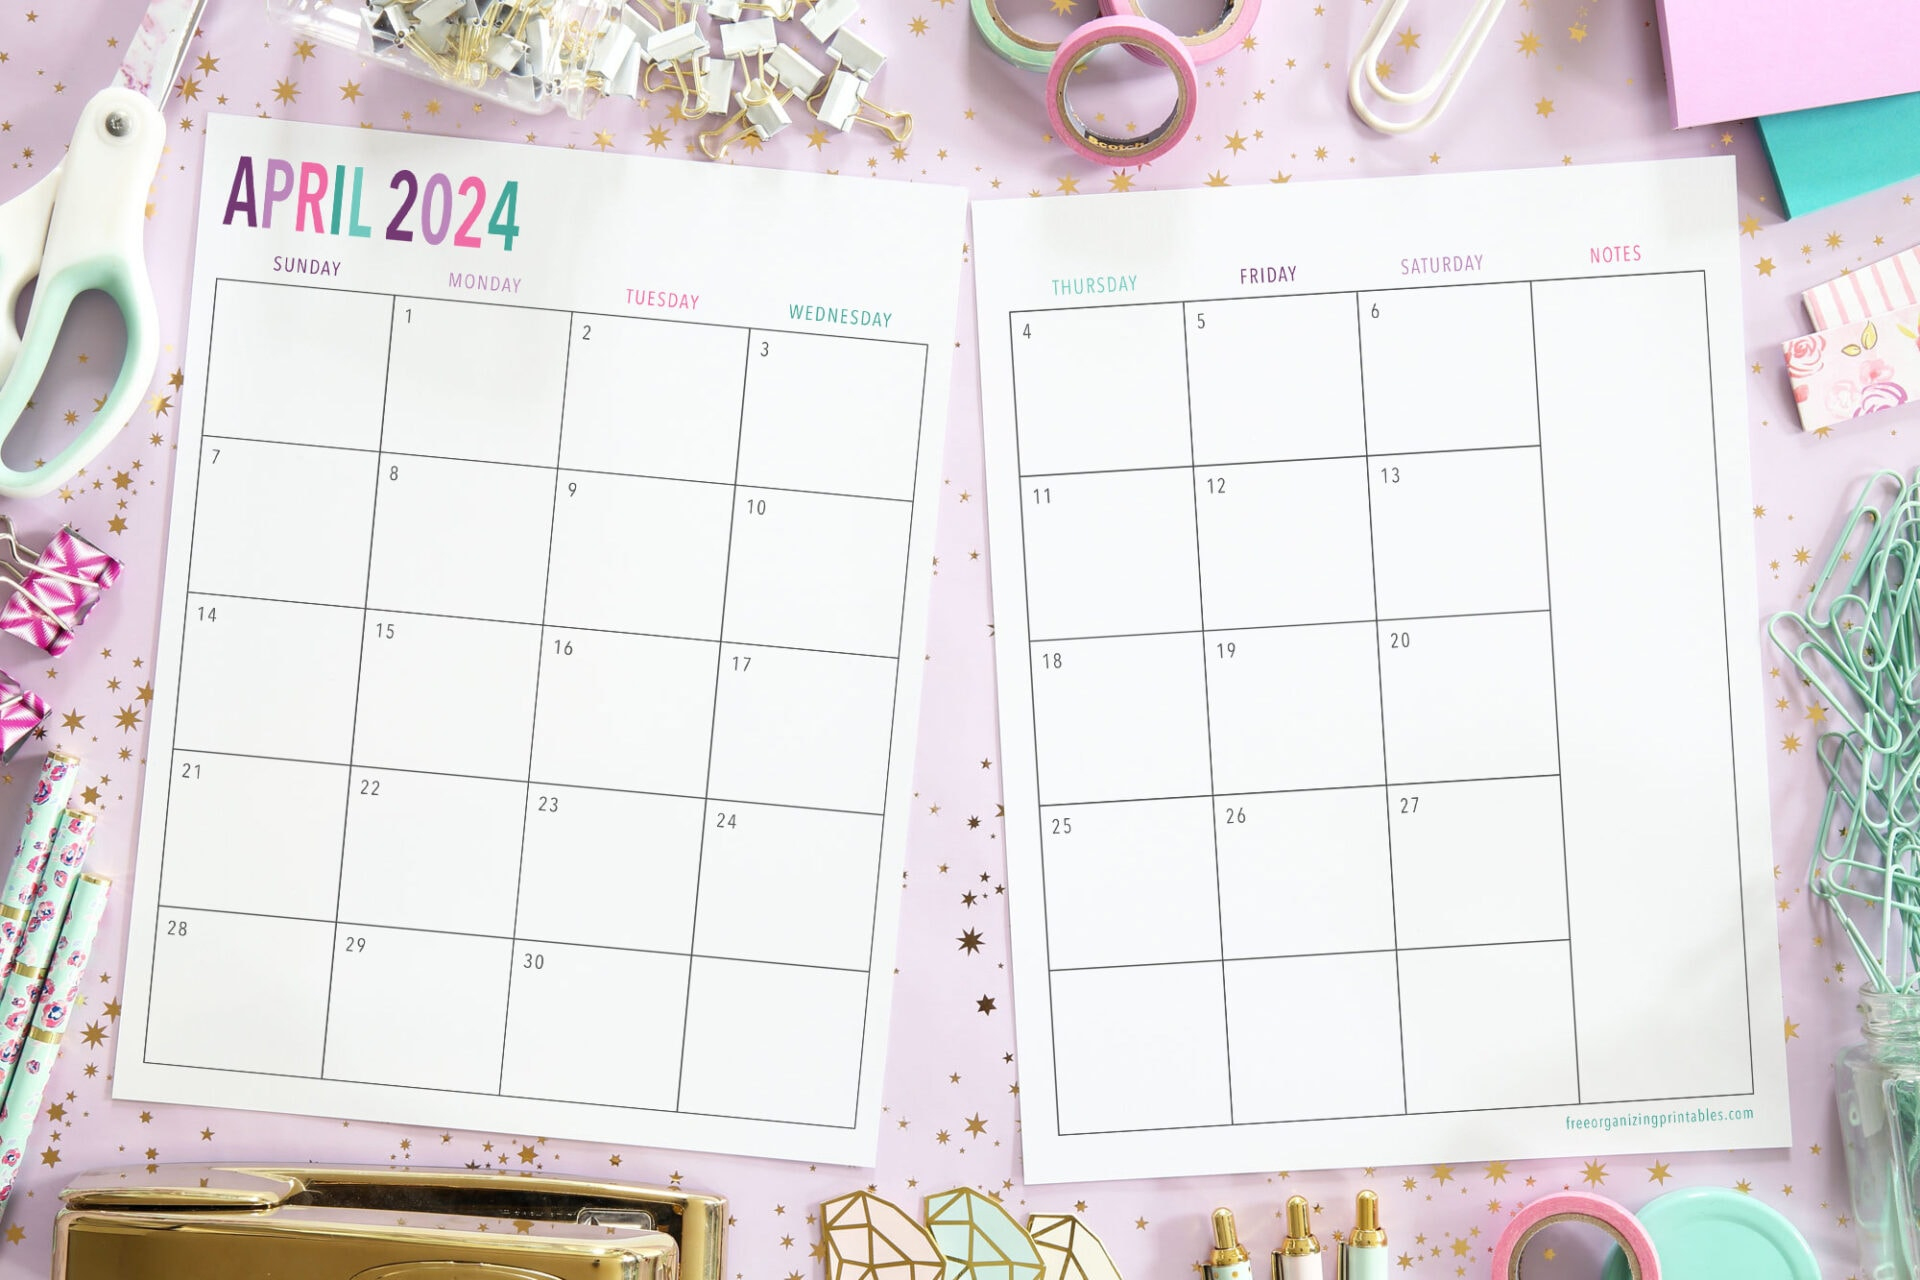 Free Printable 2 Page Blank Monthly Calendar 2024 | Printable 2024 Calendars Without Installing